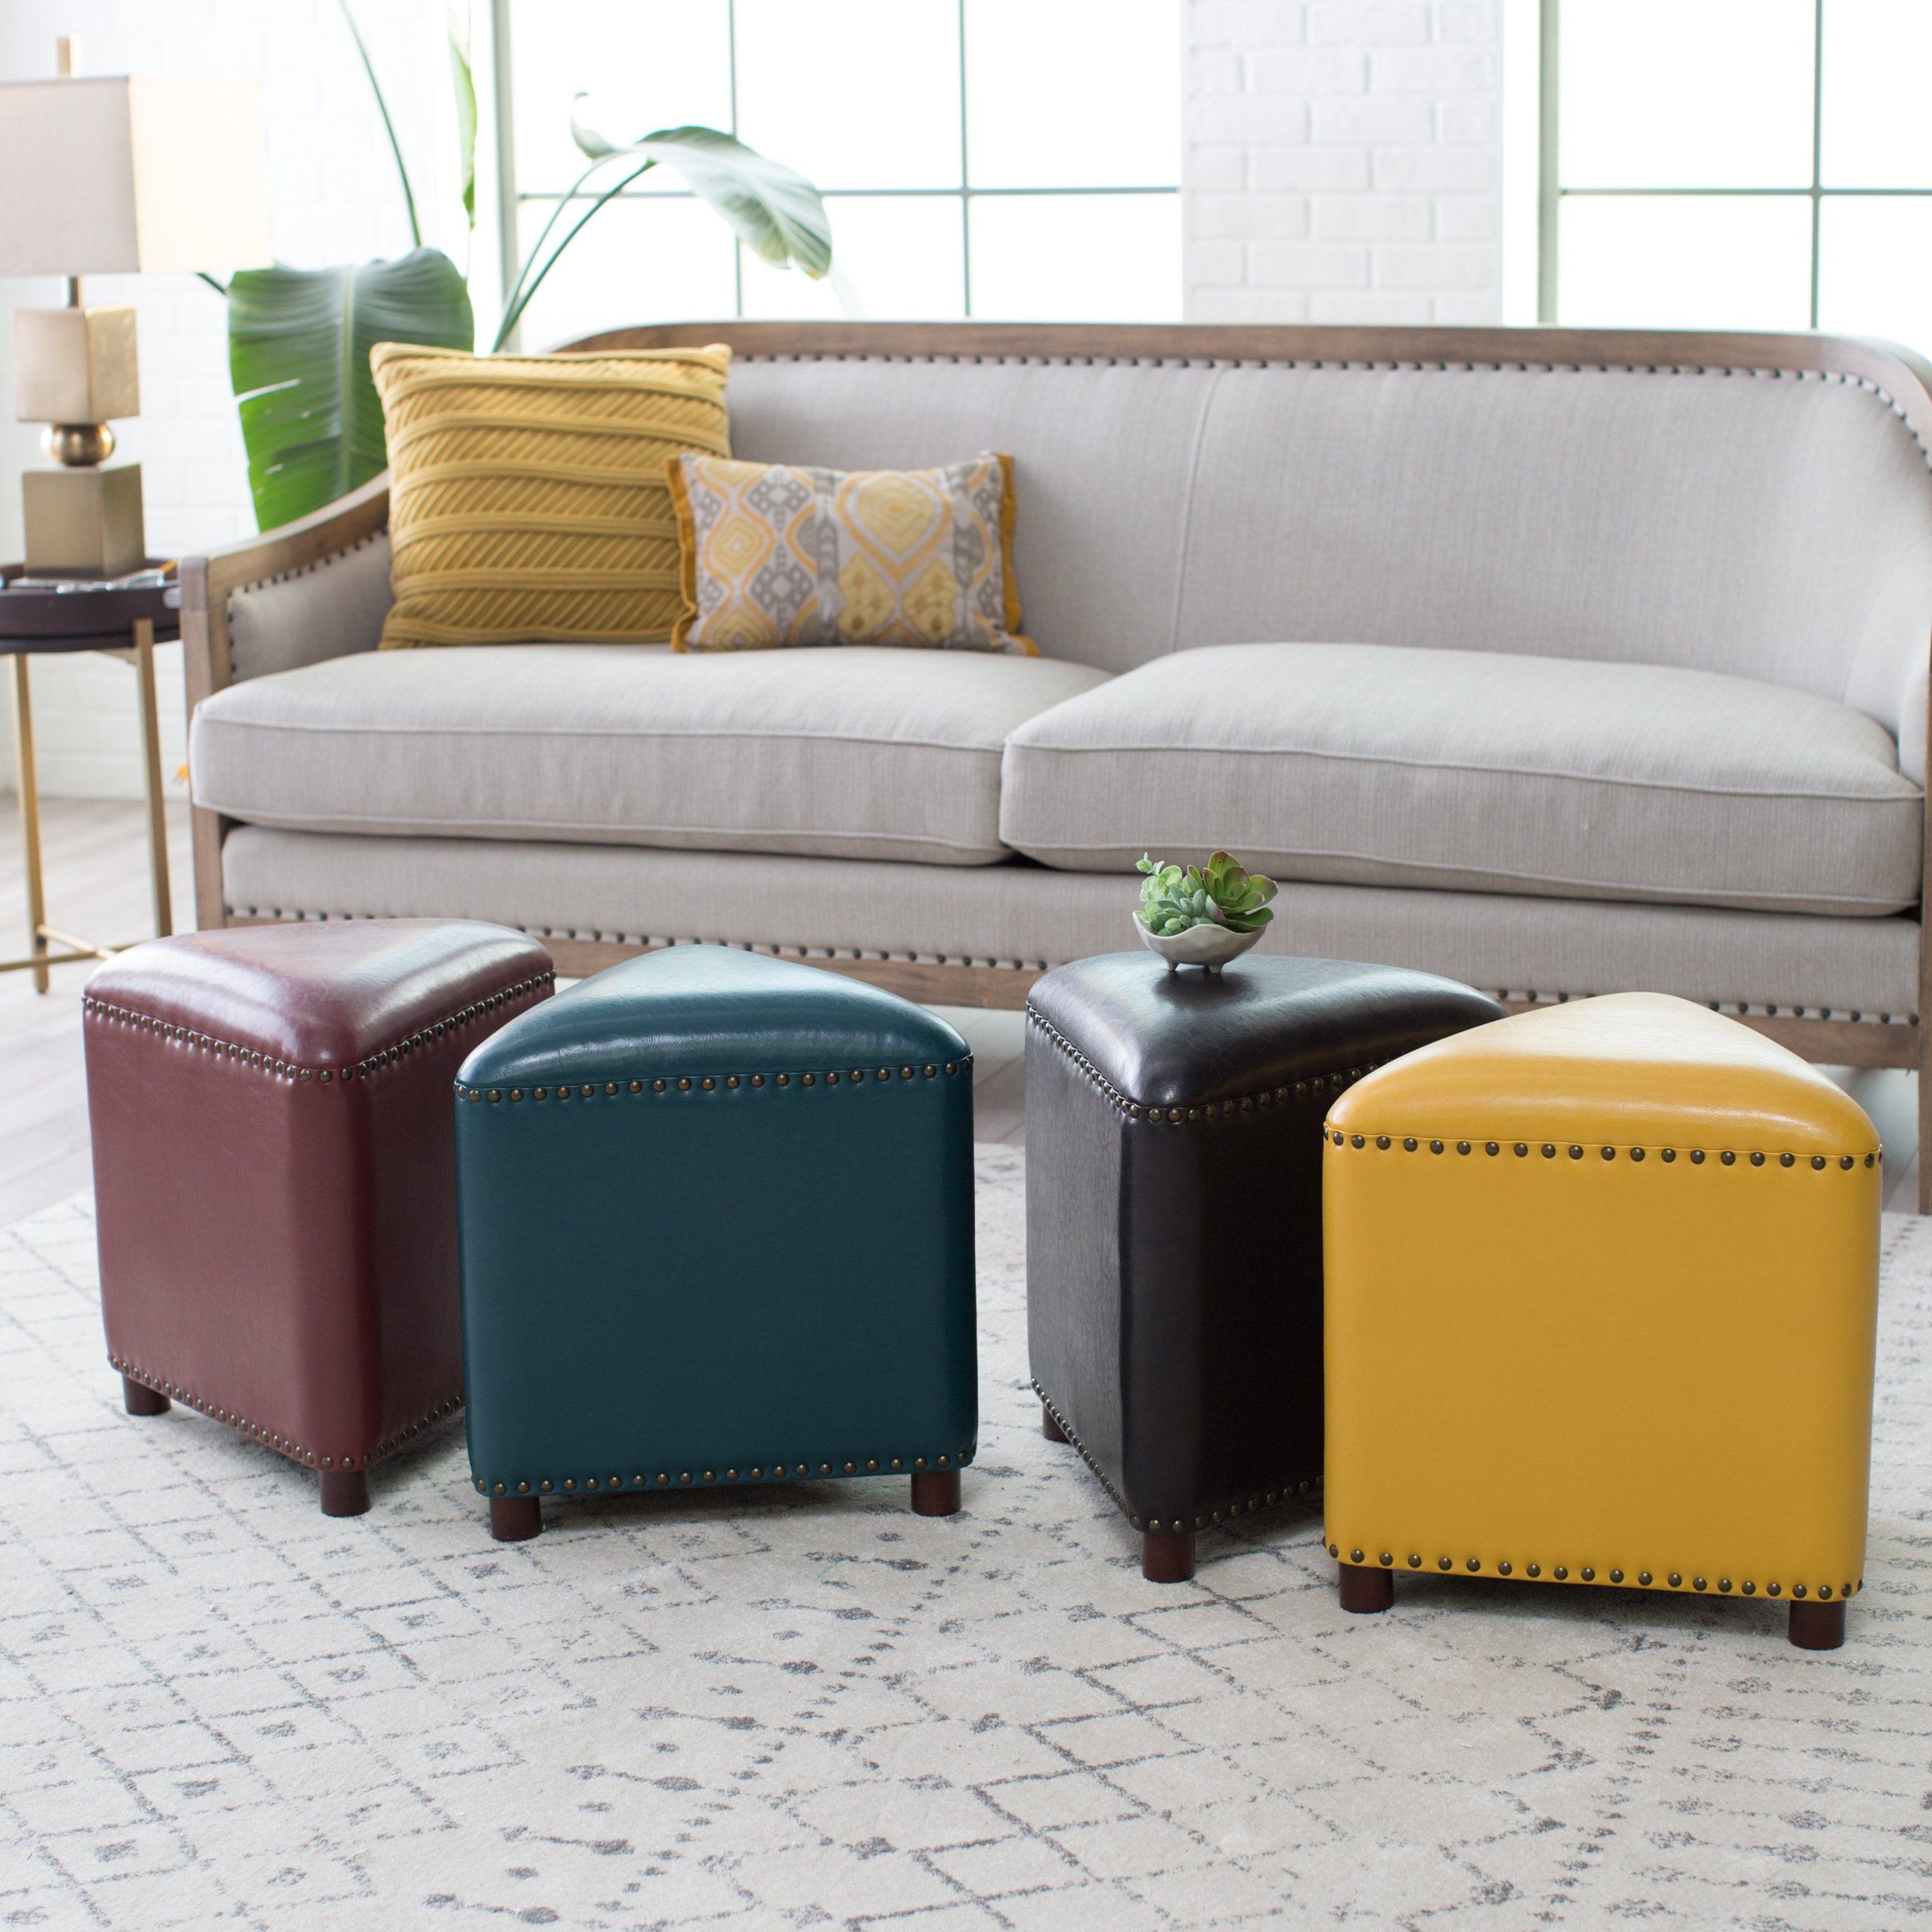 Belham Living Hutton Triangle Nailhead Ottoman | From Hayneedle For Round Gold Faux Leather Ottomans With Pull Tab (View 20 of 20)